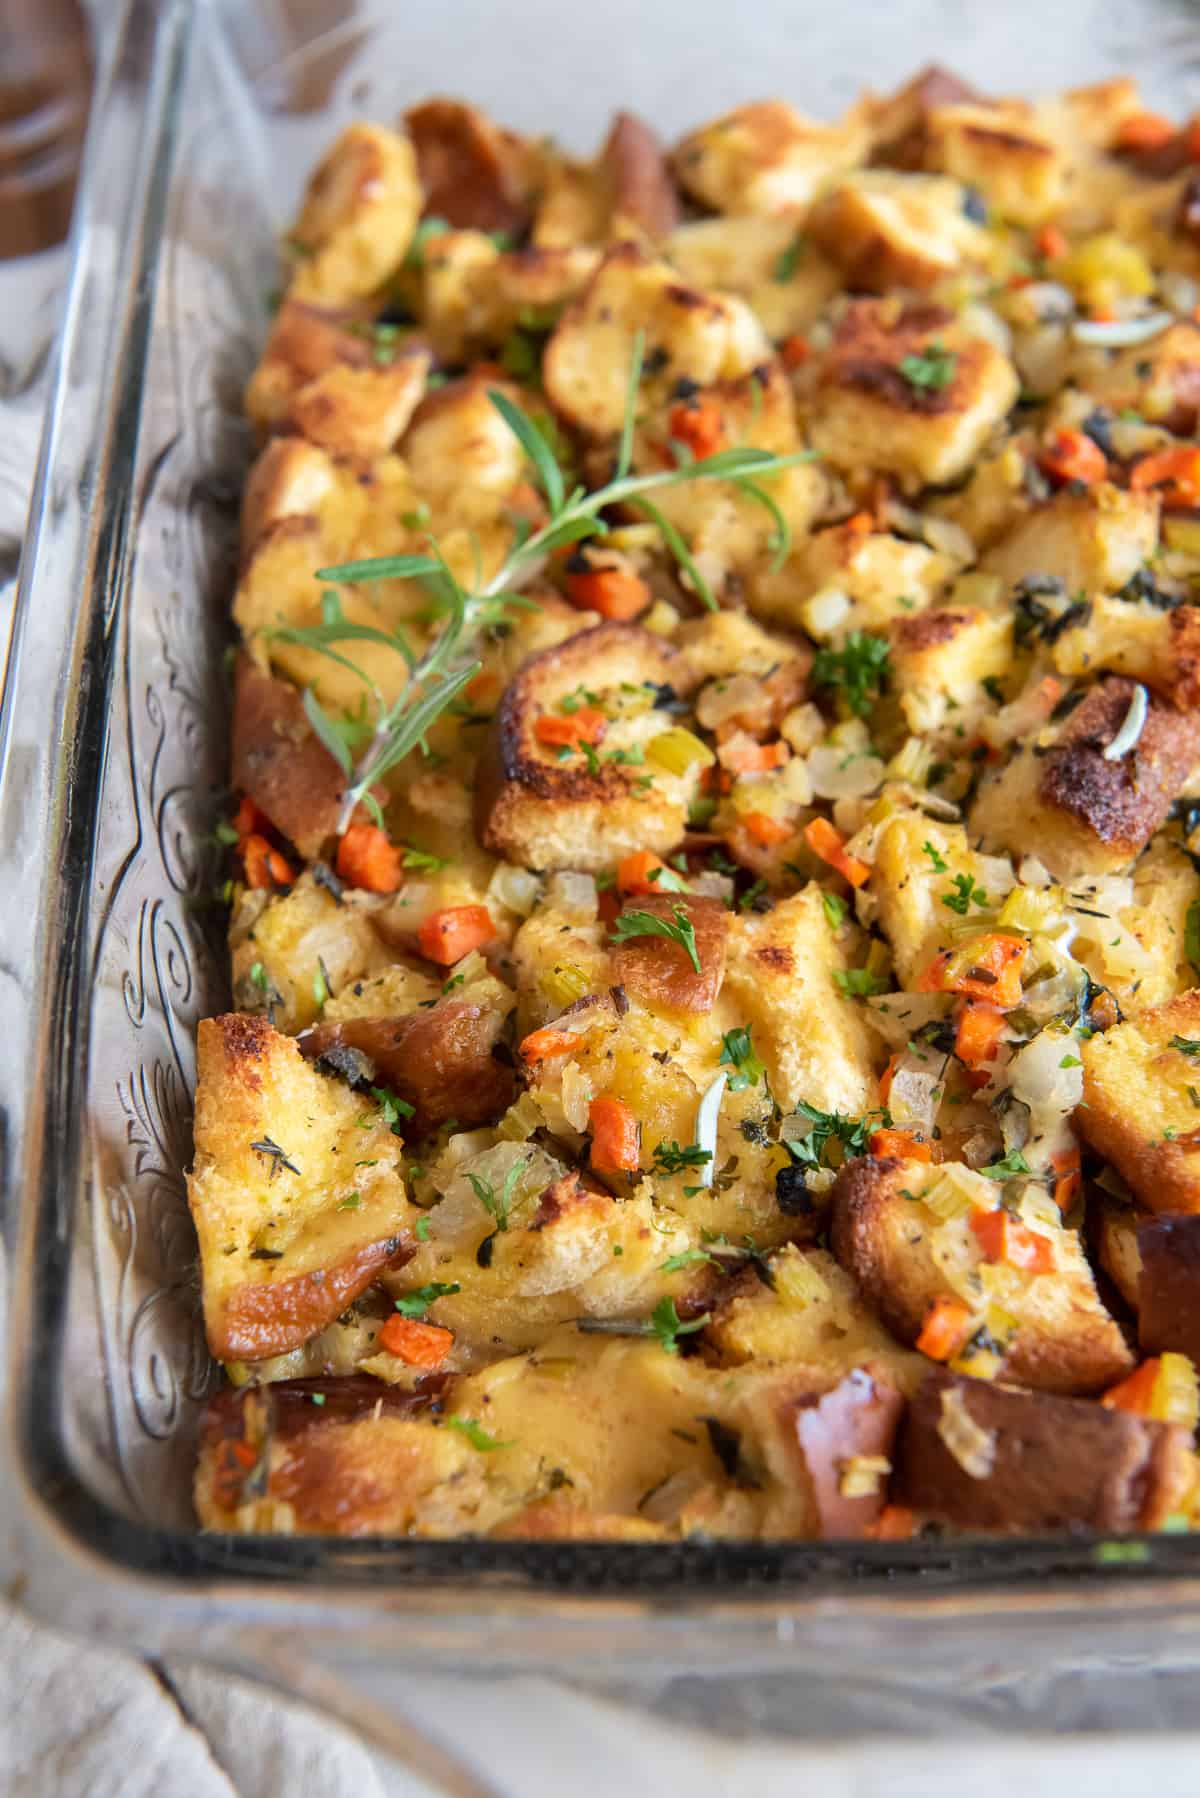 A close up of brioche stuffing in a glass baking dish.